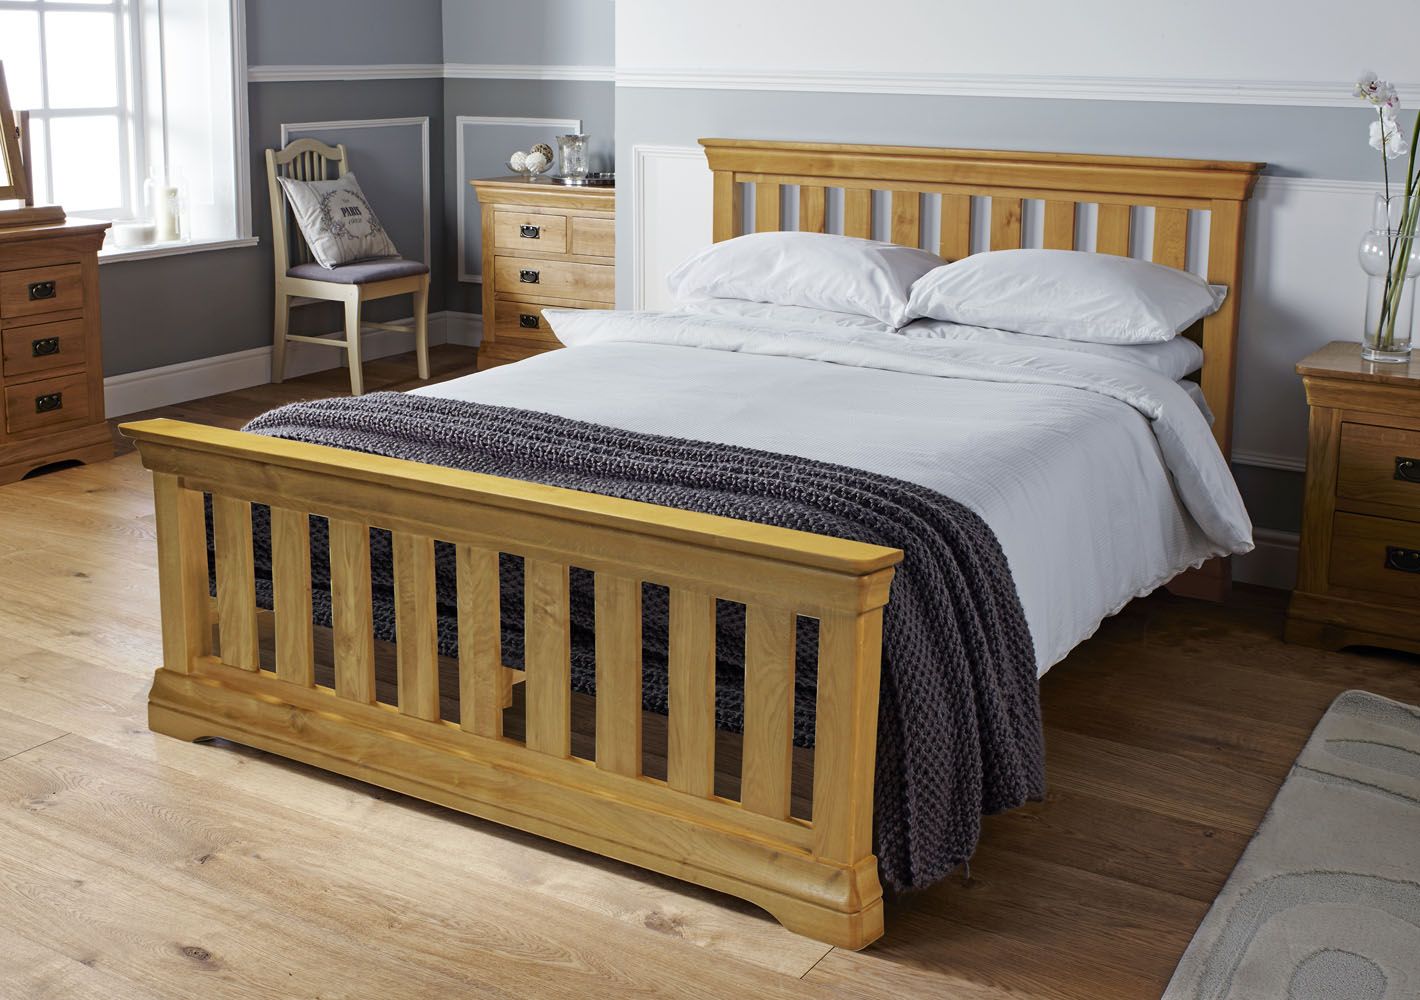 Farmhouse Country Oak Slatted 4ft 6 Inches Double Bed - 10% OFF WINTER SALE